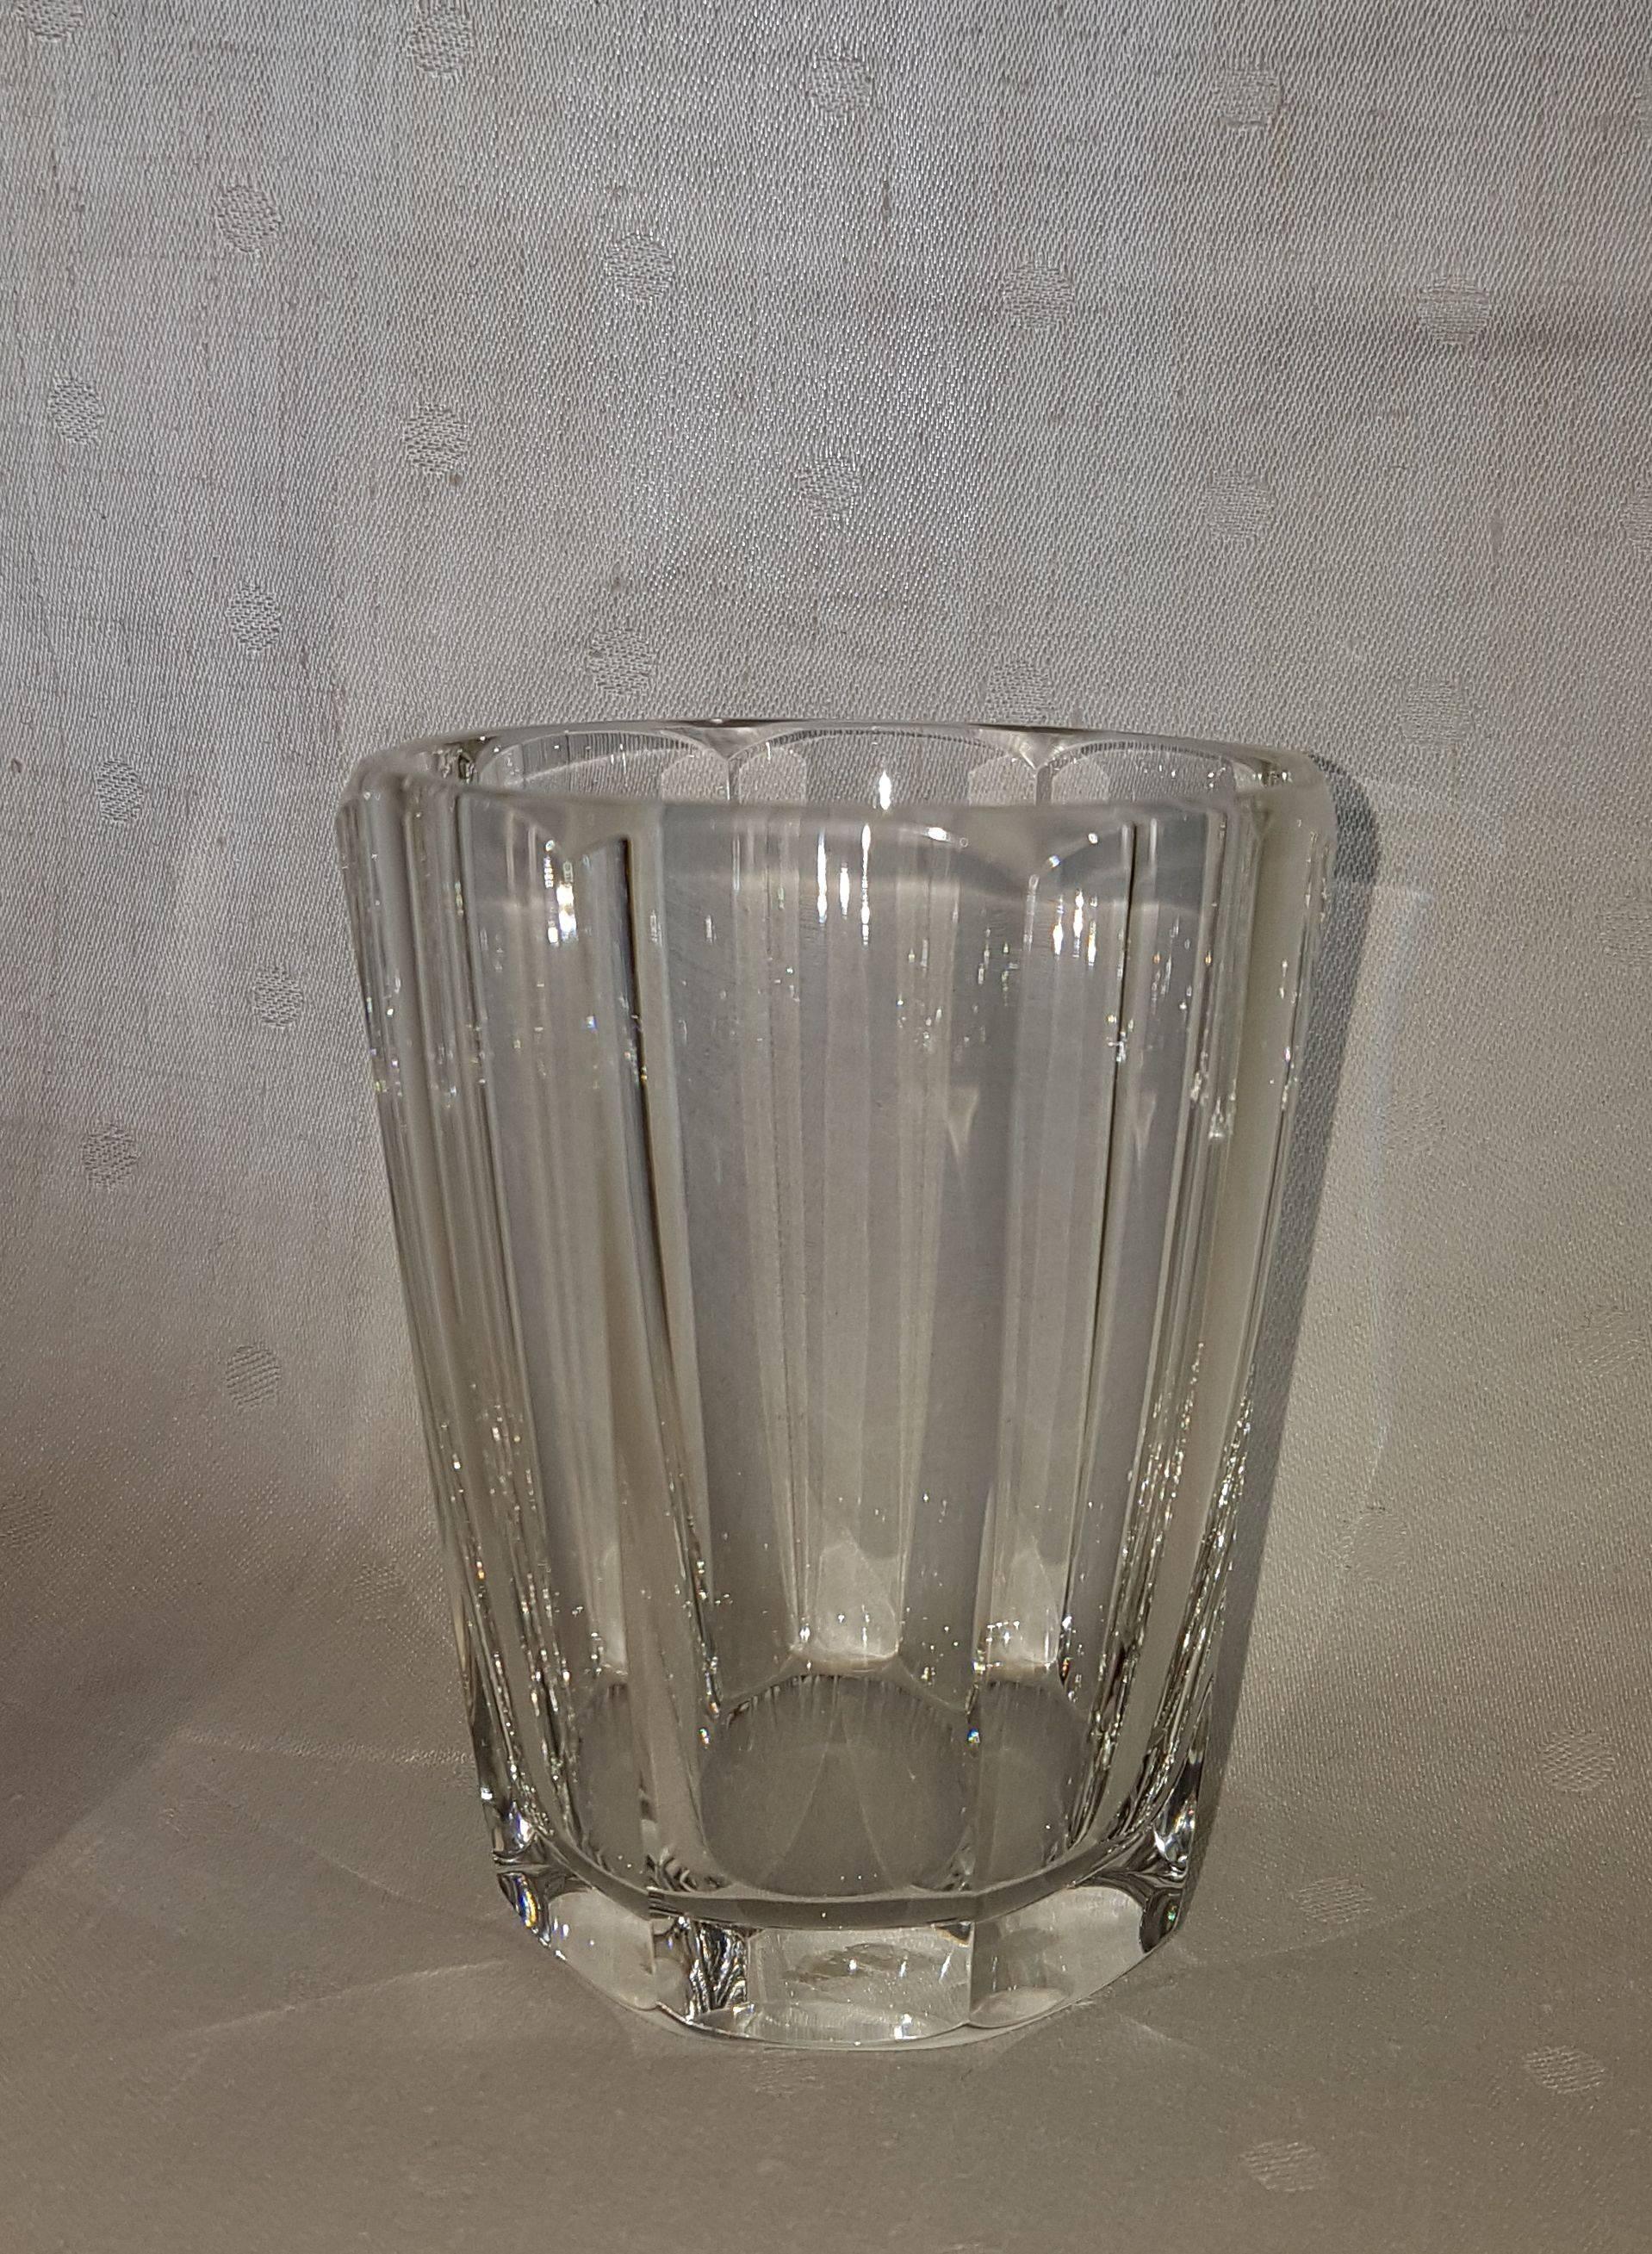 Mouth blown hand-cut crystal glass goblets made in Germany: solid, noble, elegant.
The “Biedermeier” inspired style, with beveled body, base and stem pearl,
gives them a timeless beauty.
Rounded off edges for more comfortable drinking.
A